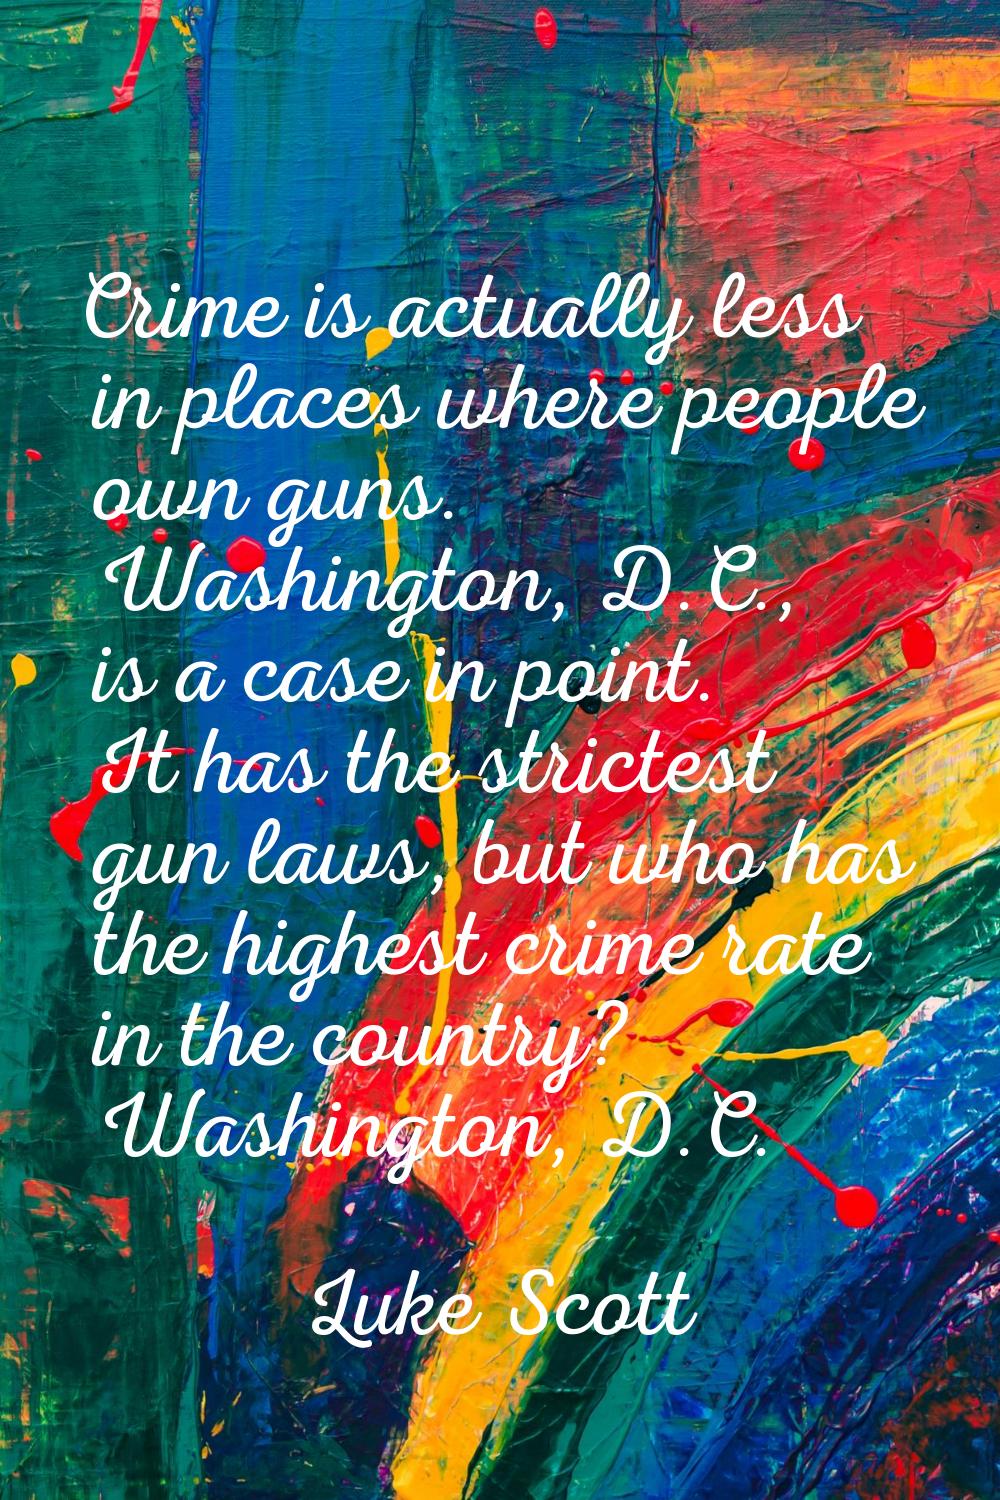 Crime is actually less in places where people own guns. Washington, D.C., is a case in point. It ha